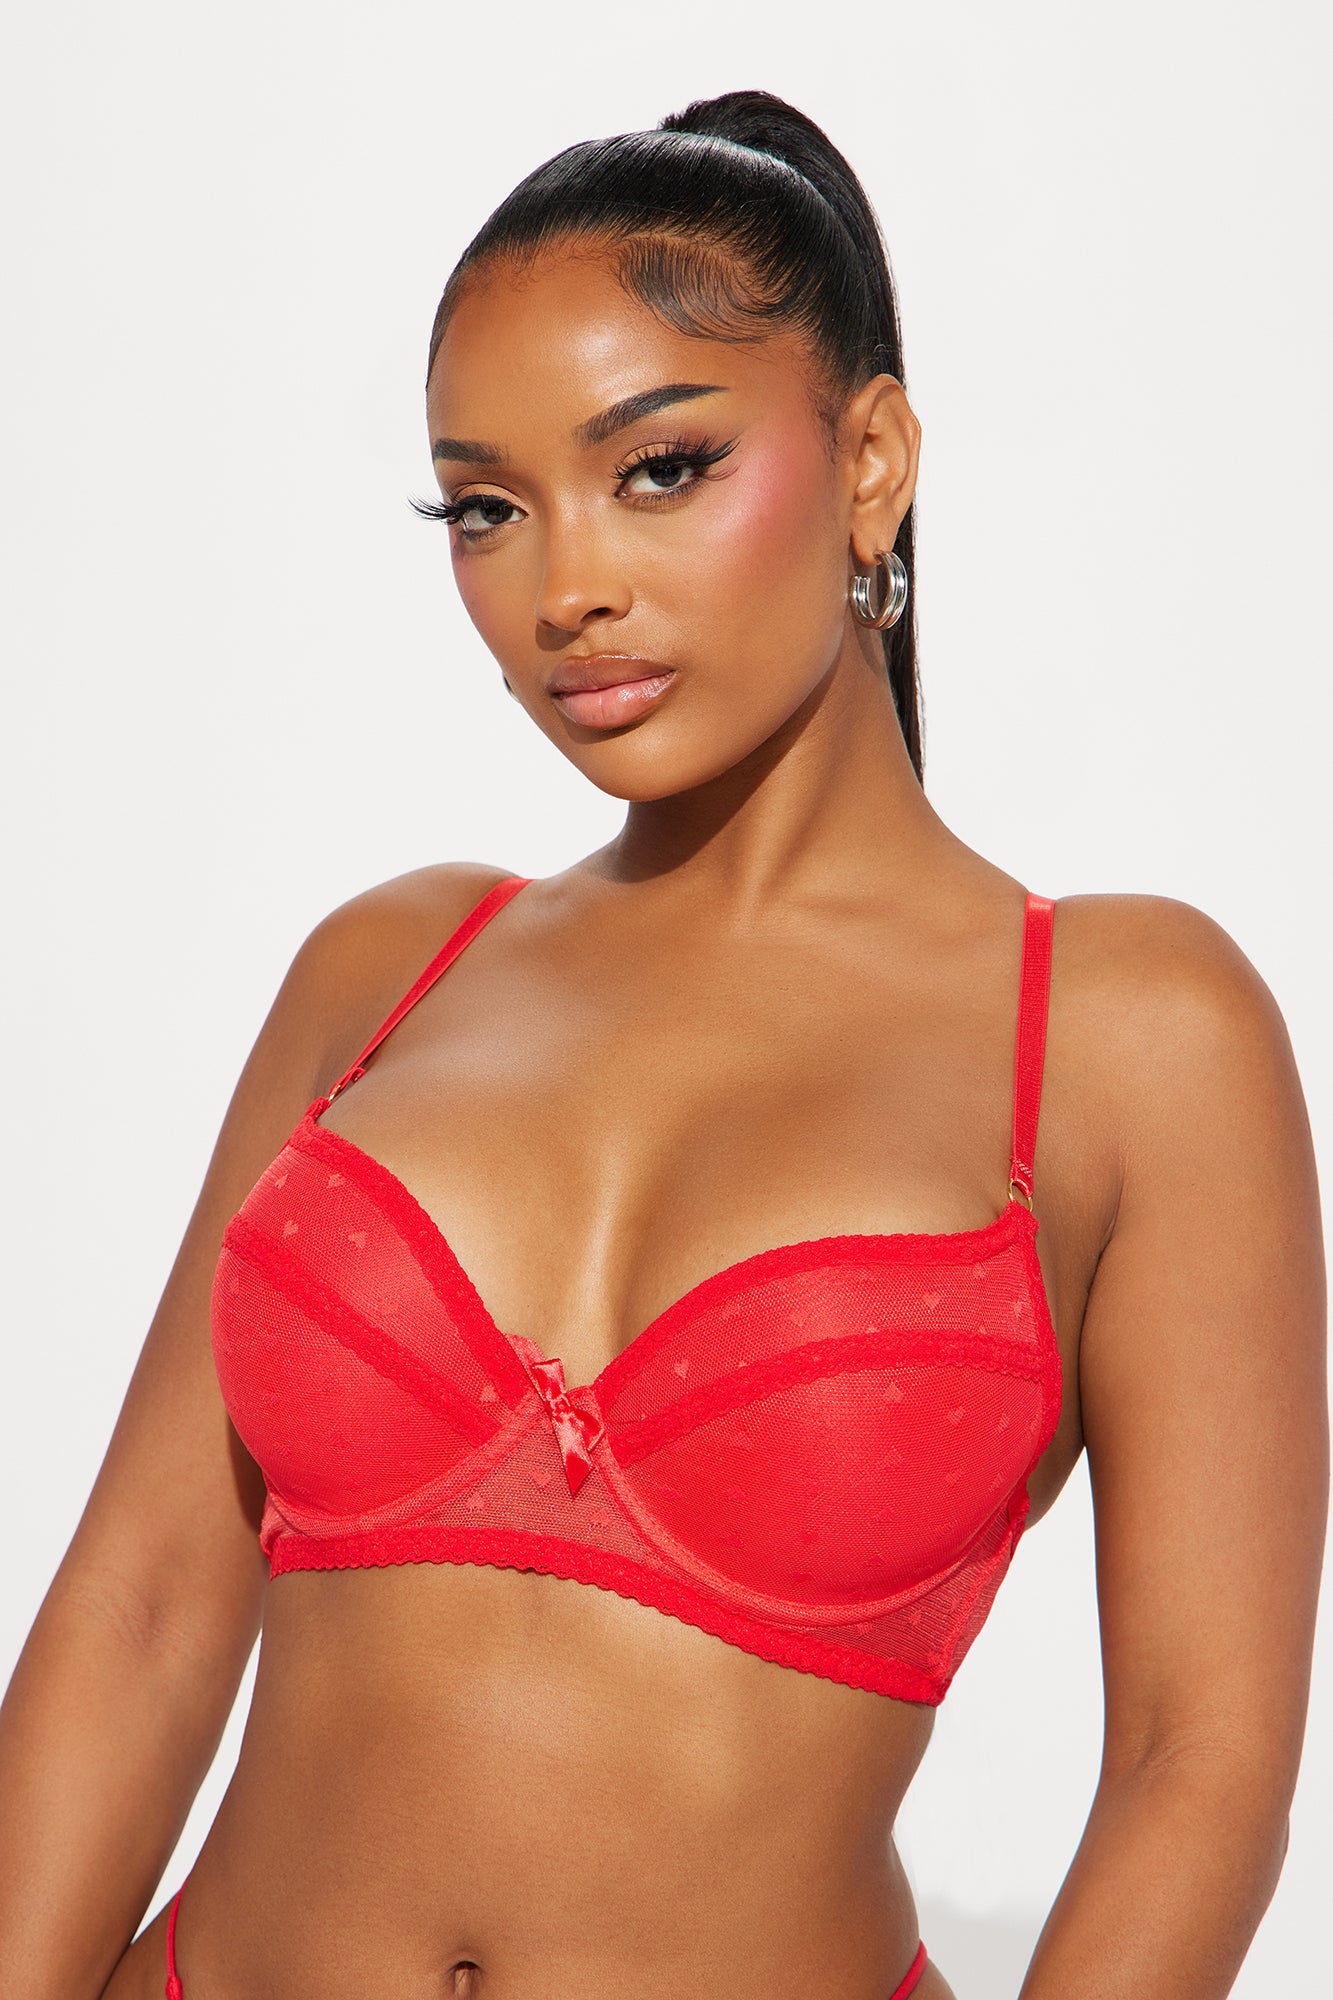 The One For Me TShirt 2 Pack Bras - Red/combo, Fashion Nova, Lingerie &  Sleepwear